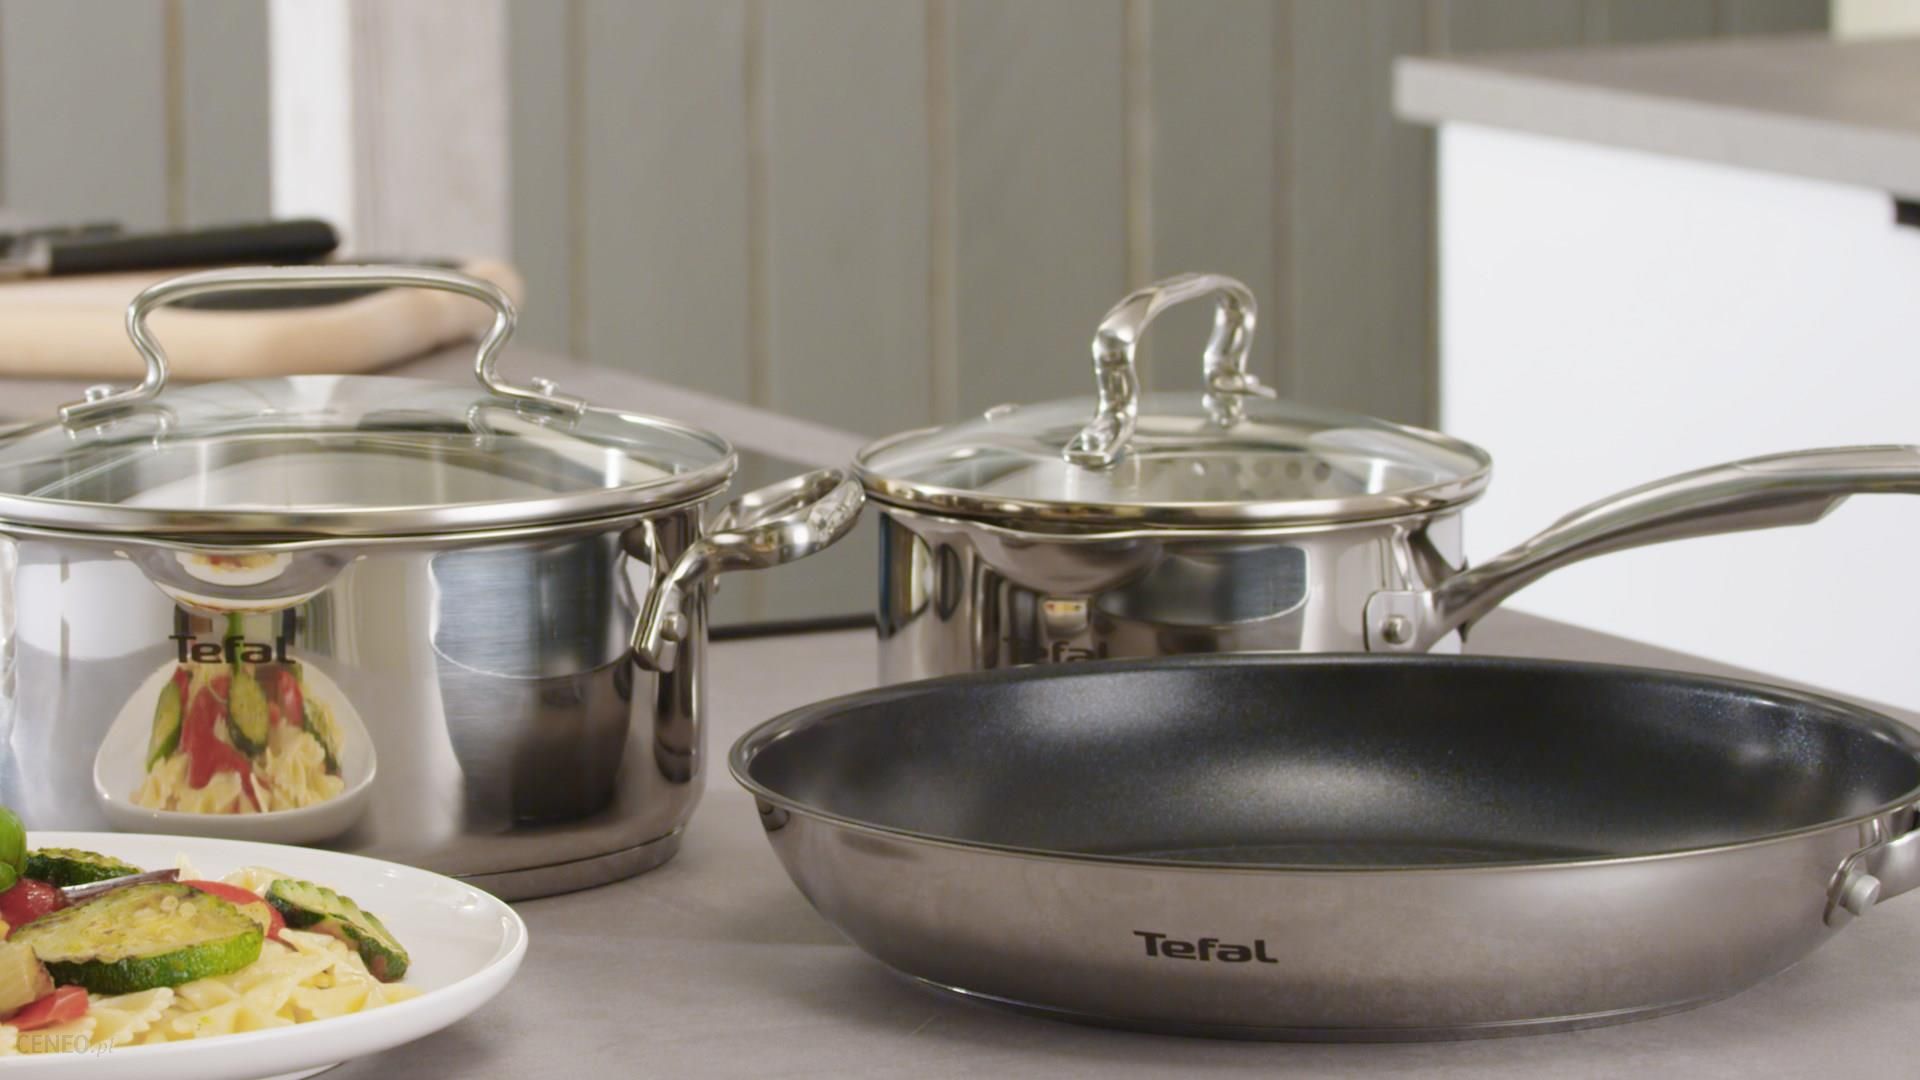 Tefal Duetto+ G7192255 16cm